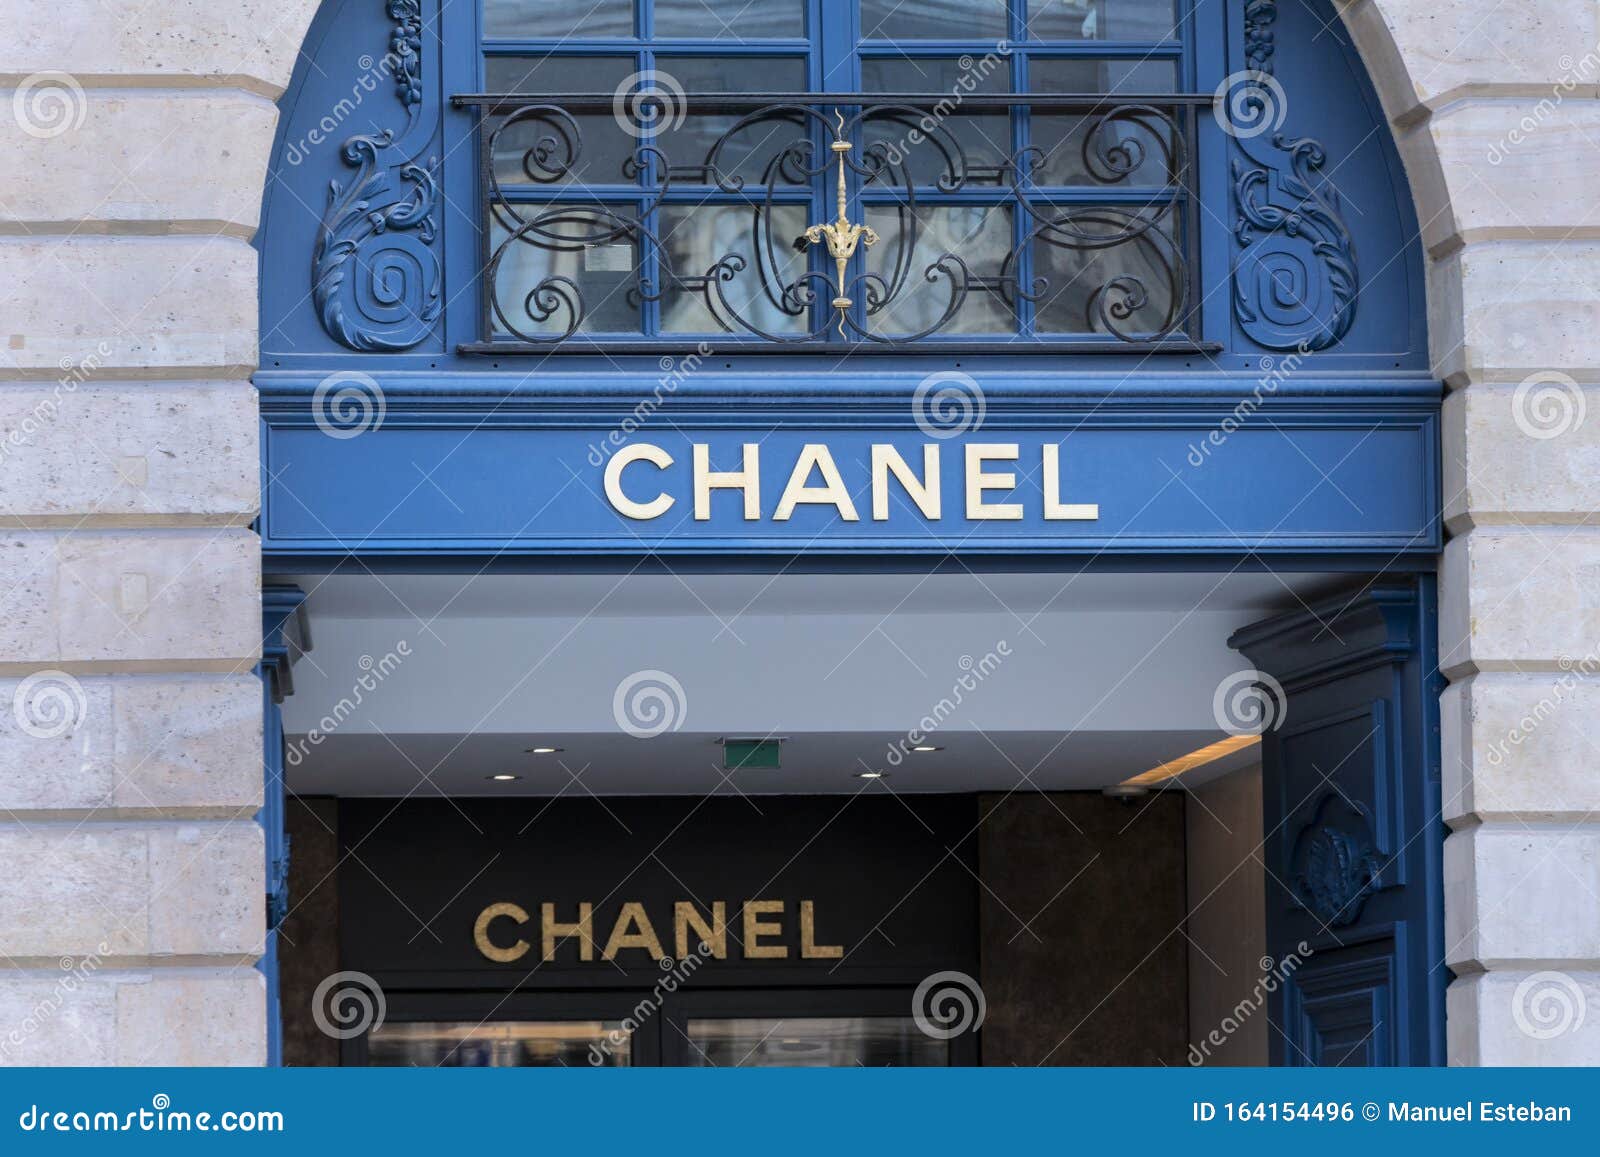 Chanel Logo on Chanel Store Editorial Photo - Image of word